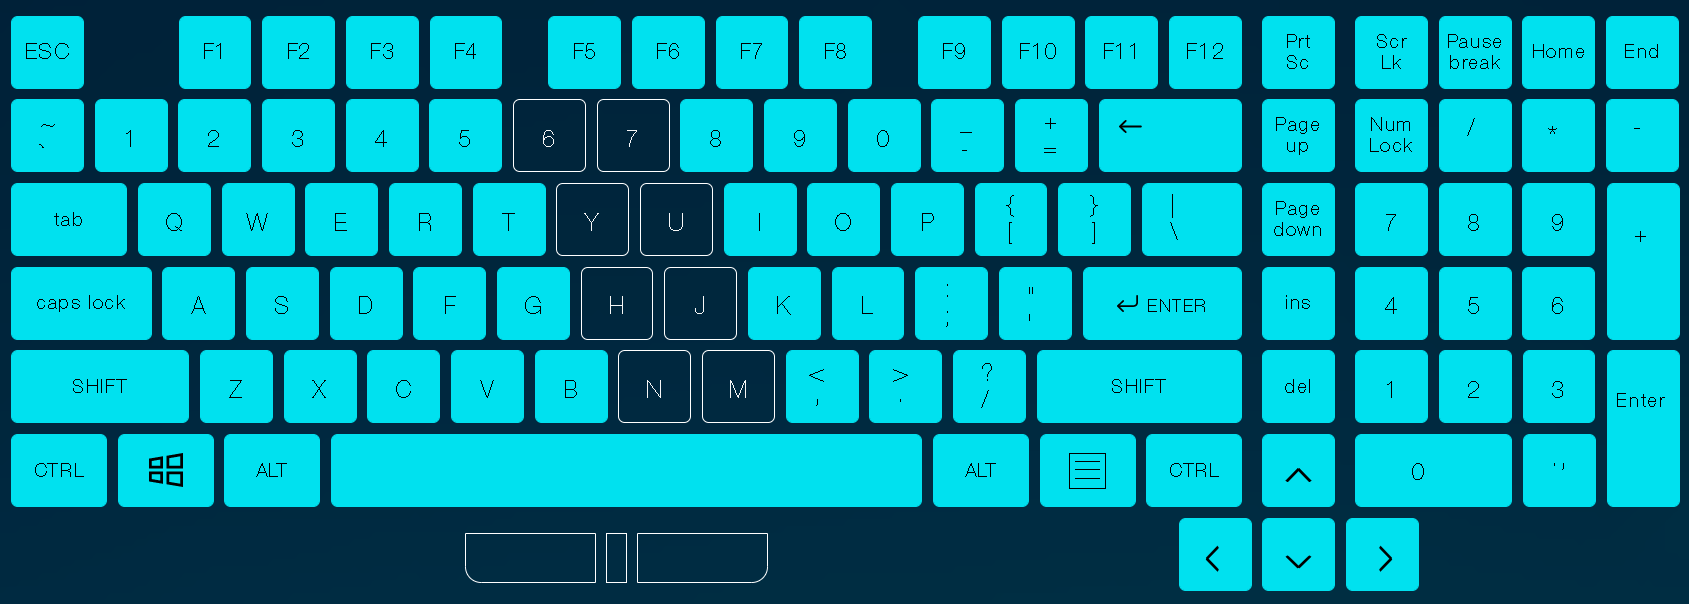 Fix Membrane Keyboard With Some Non-working Keys